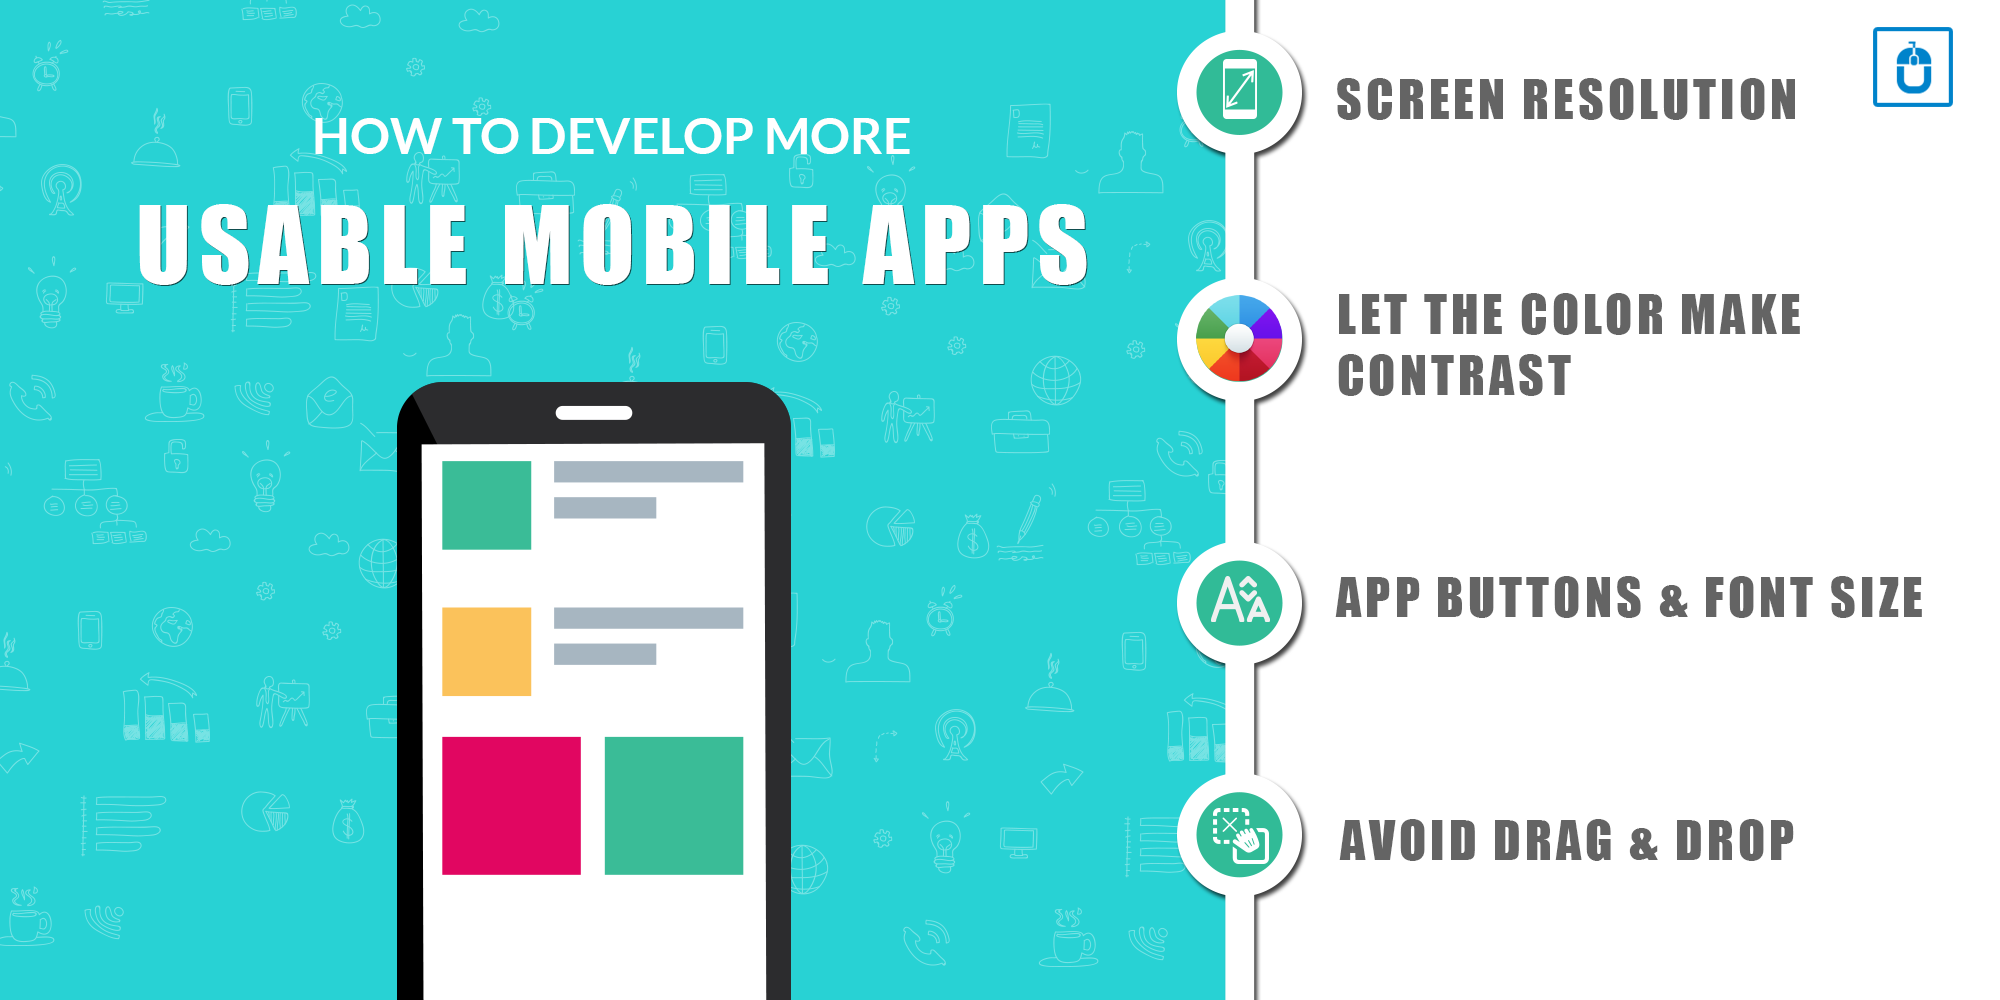 How to Develop More Usable Mobile Apps